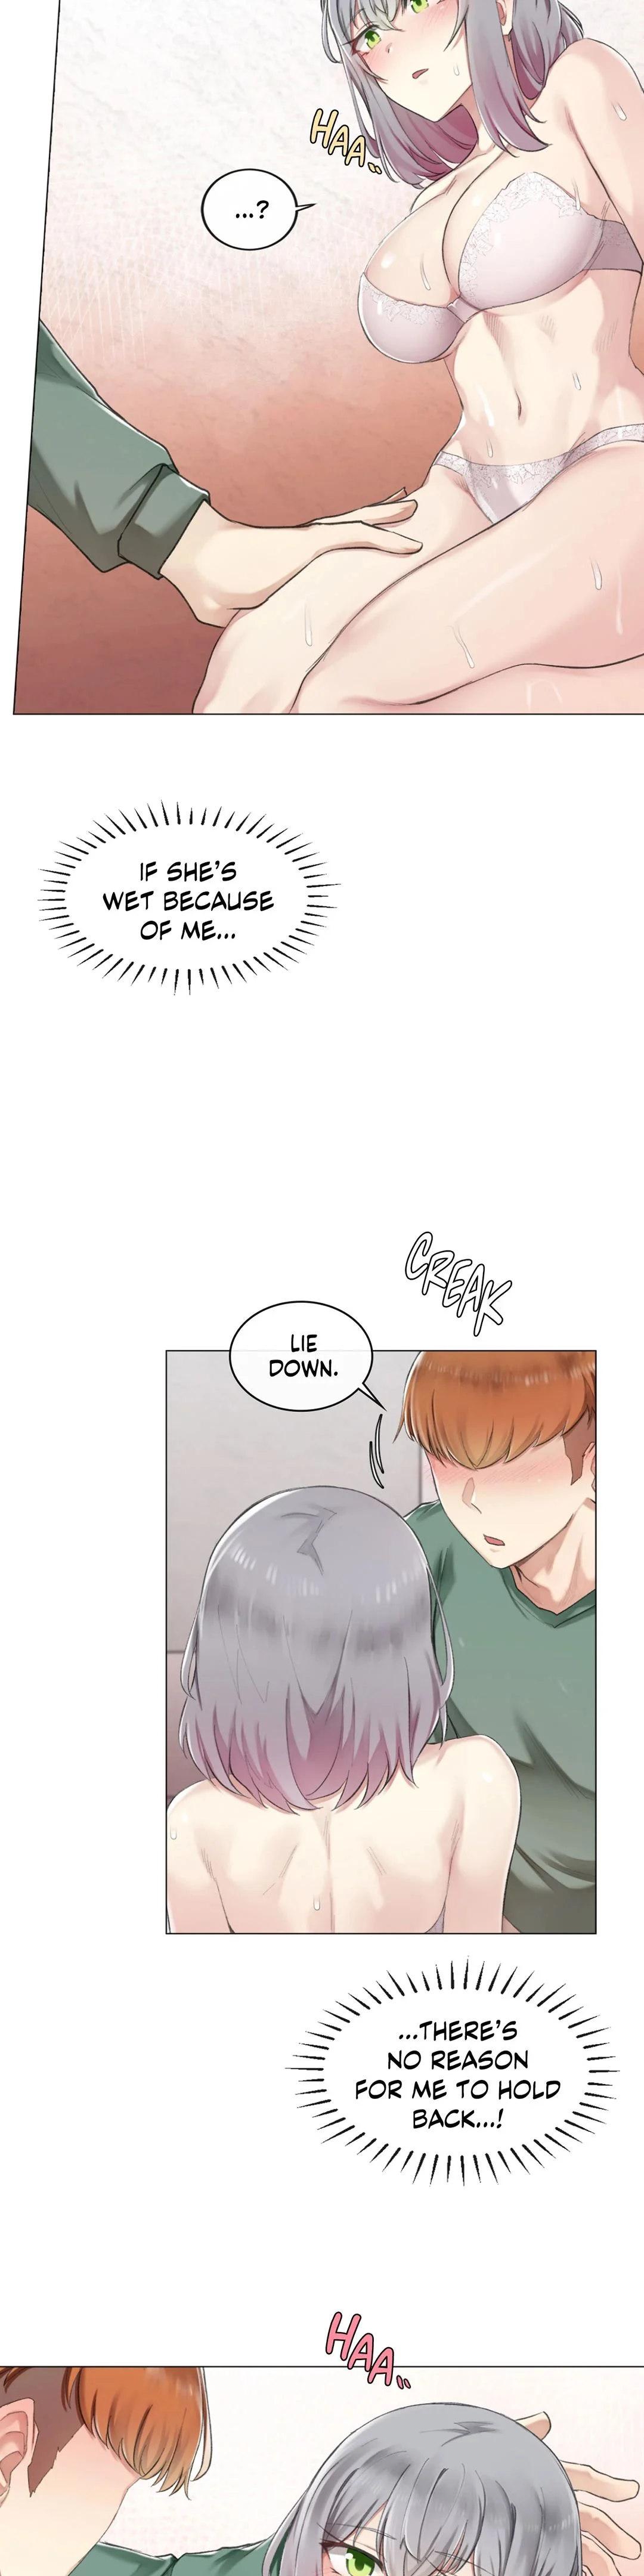 [Dumangoon, KONG_] Sexcape Room: Snap Off Ch.7/7 [English] [Manhwa PDF] Completed 77